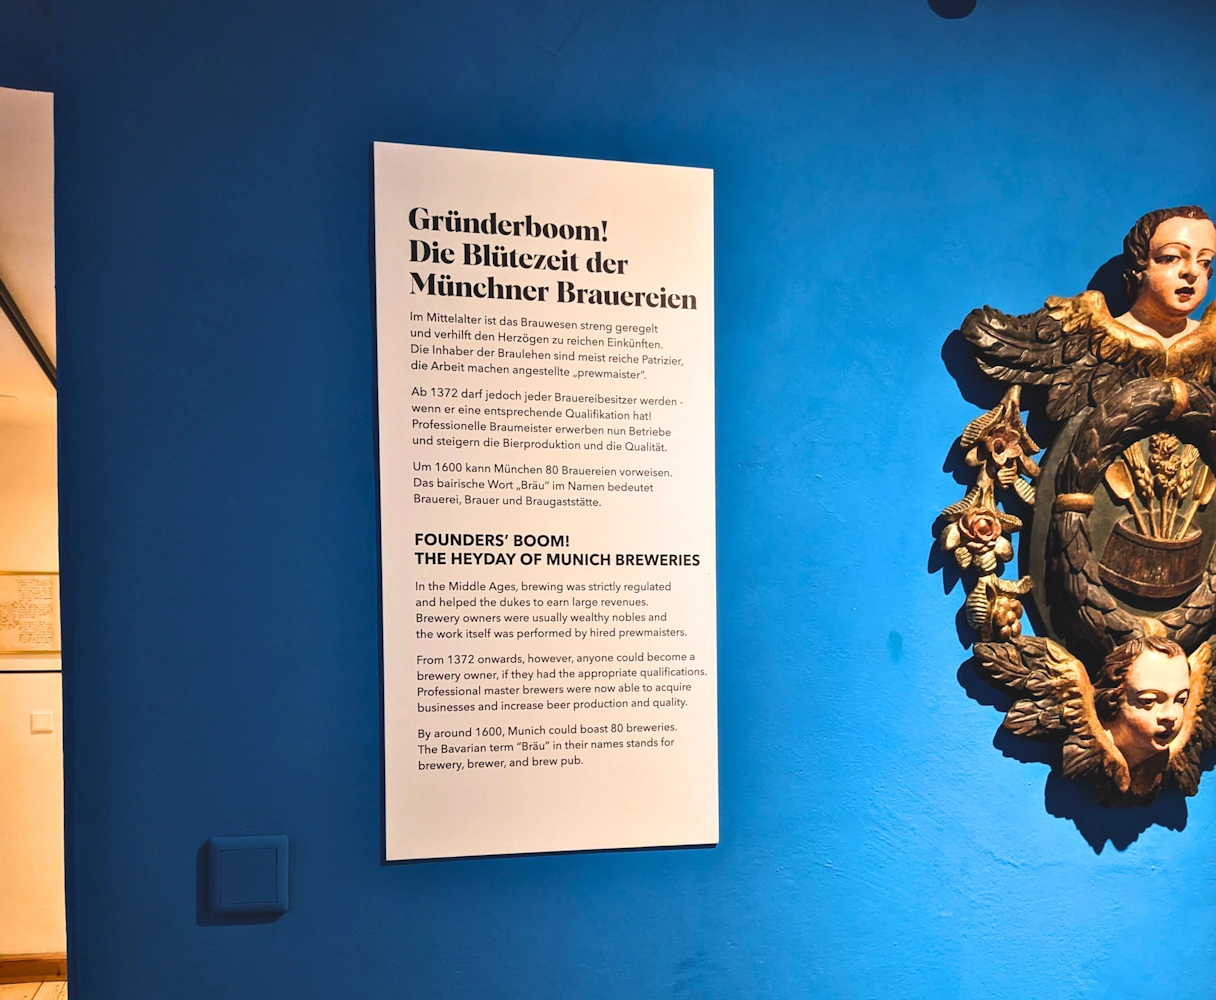 Beer & Oktoberfest Museum Information board on the founding boom of breweries in Munich